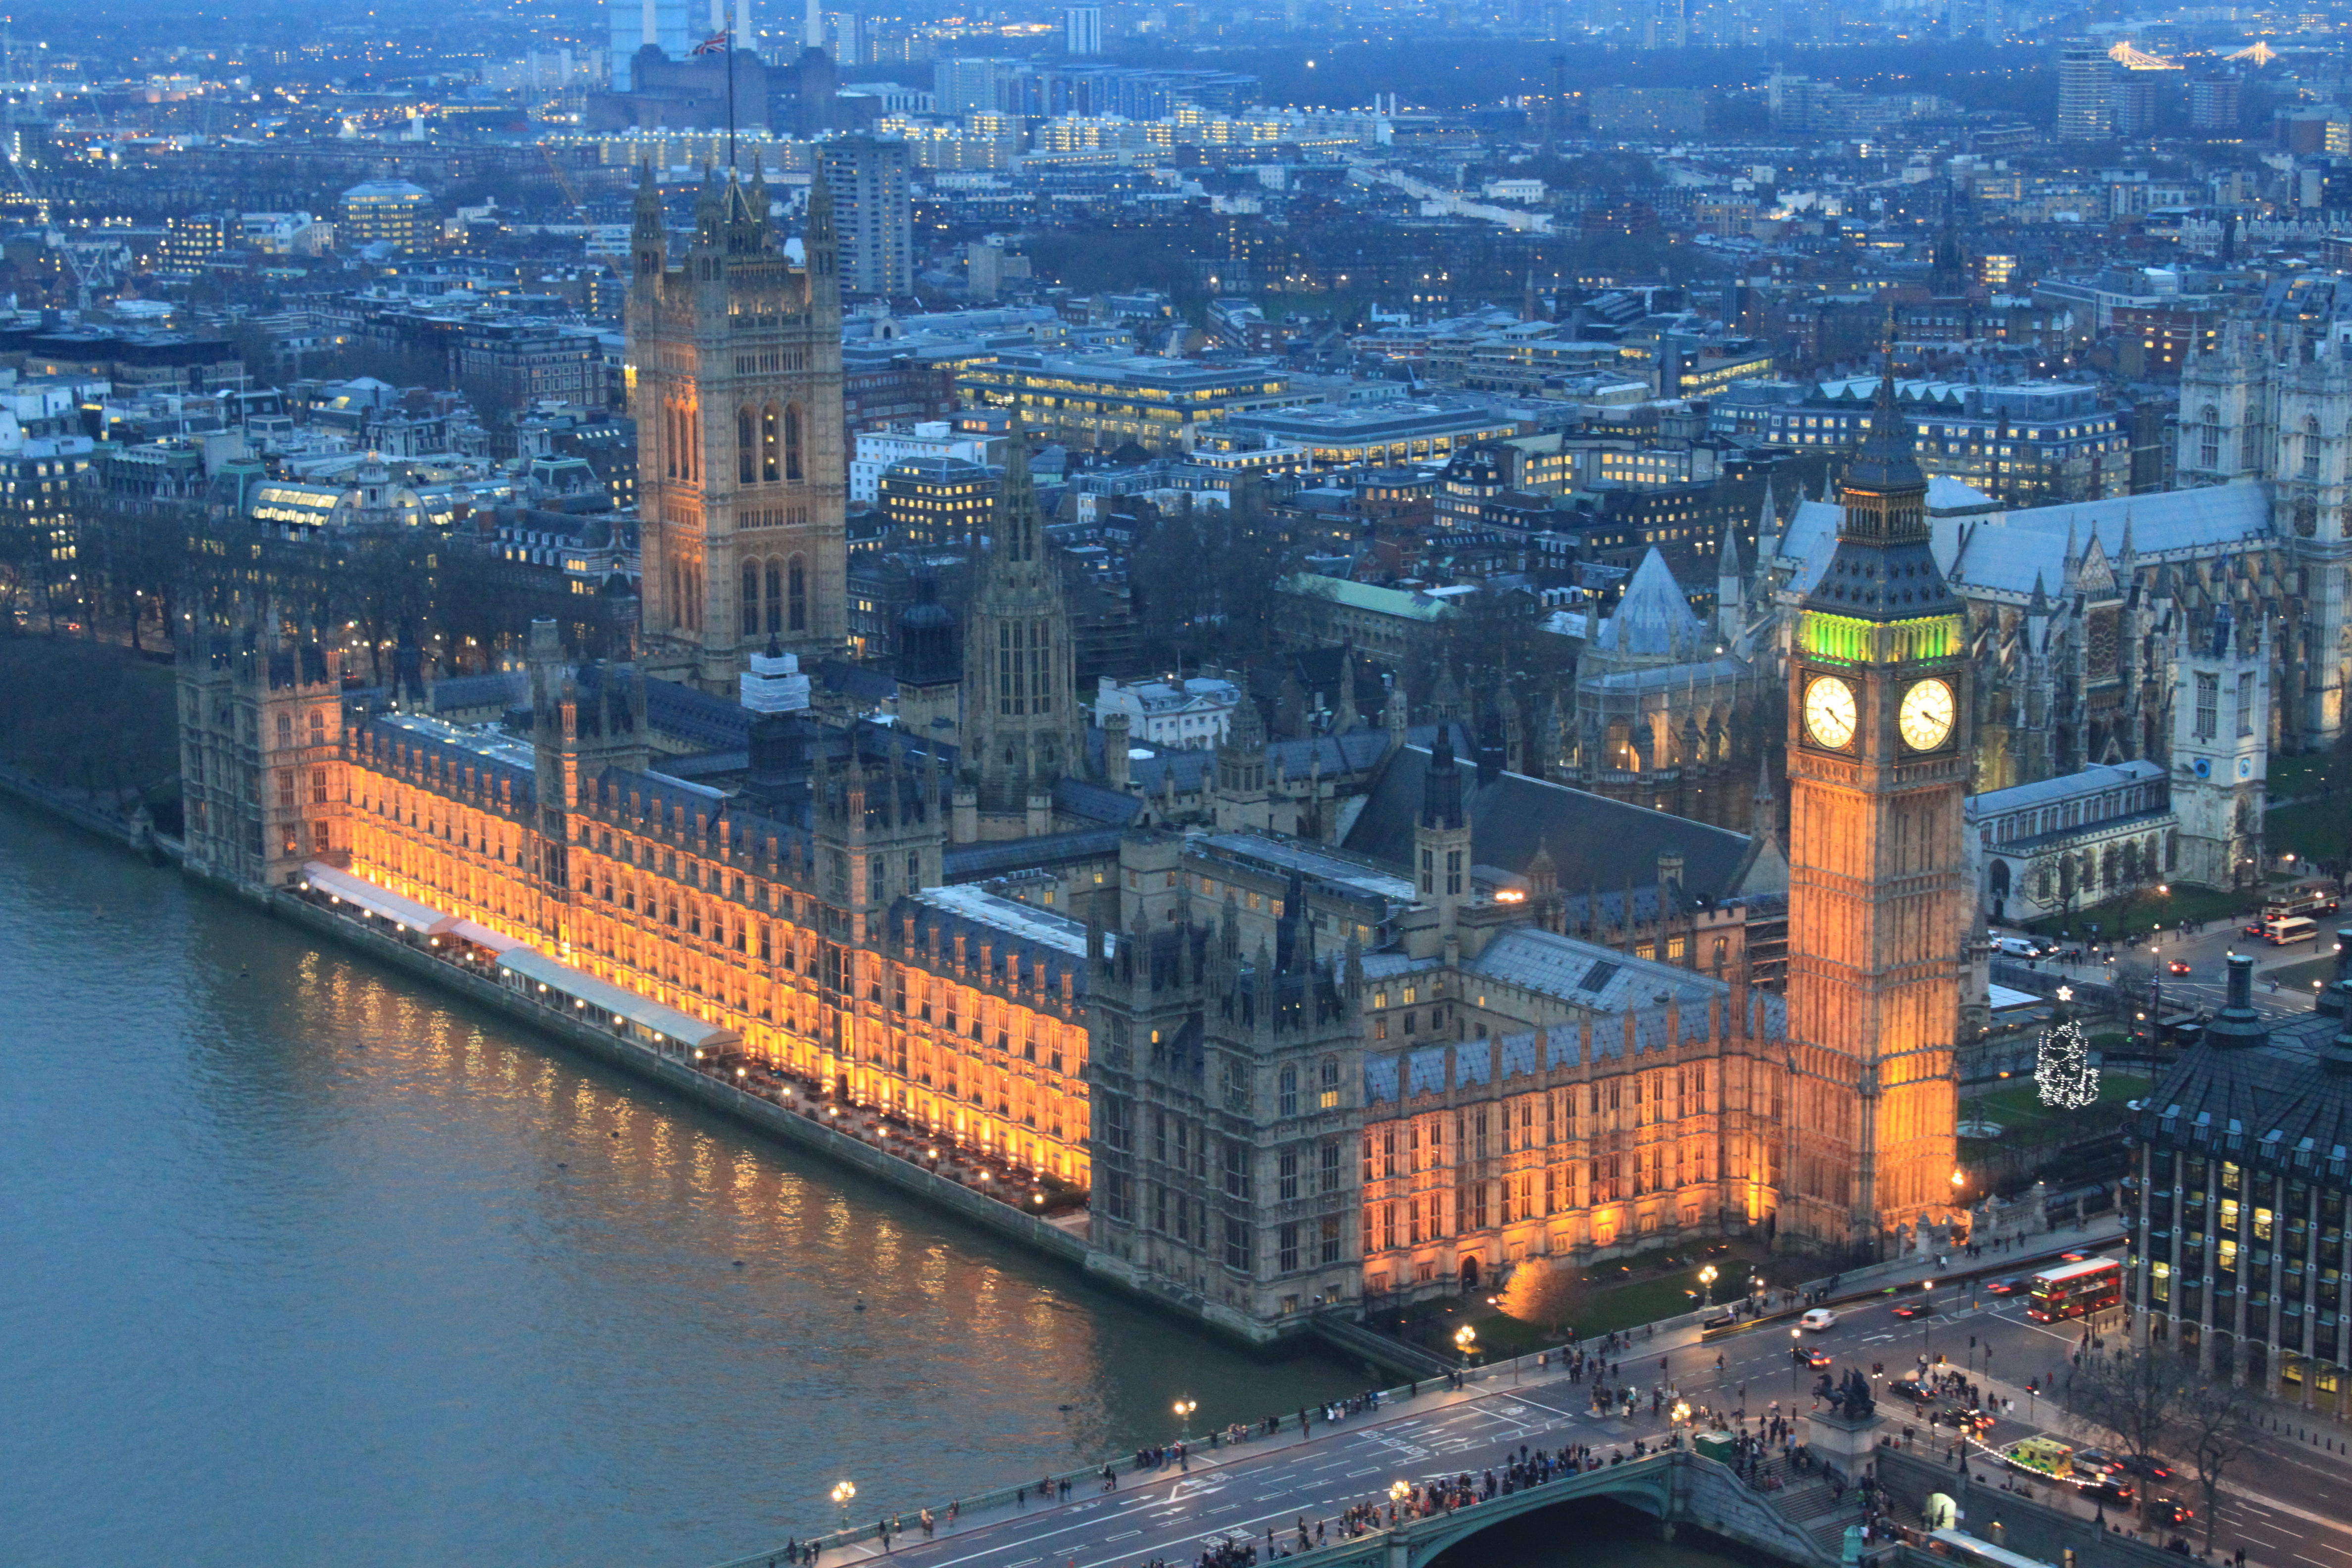 London Group - The Palace of Westminster